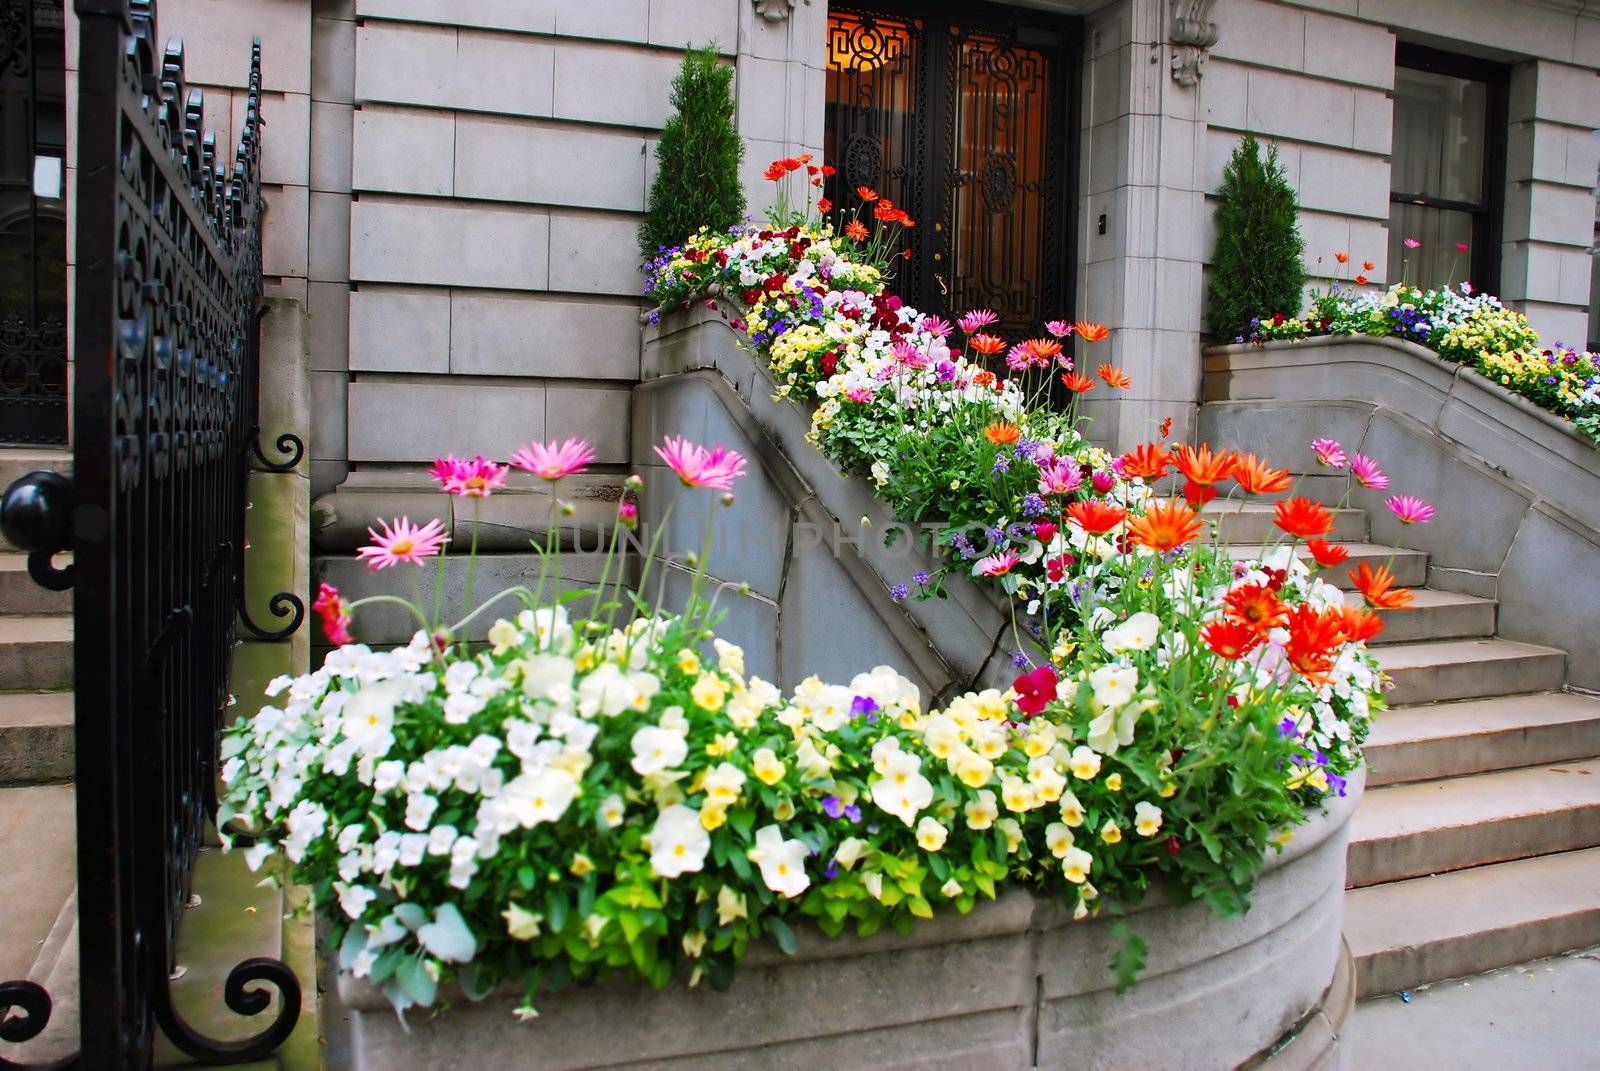 Front stairs of old stone building surrounded by flowers